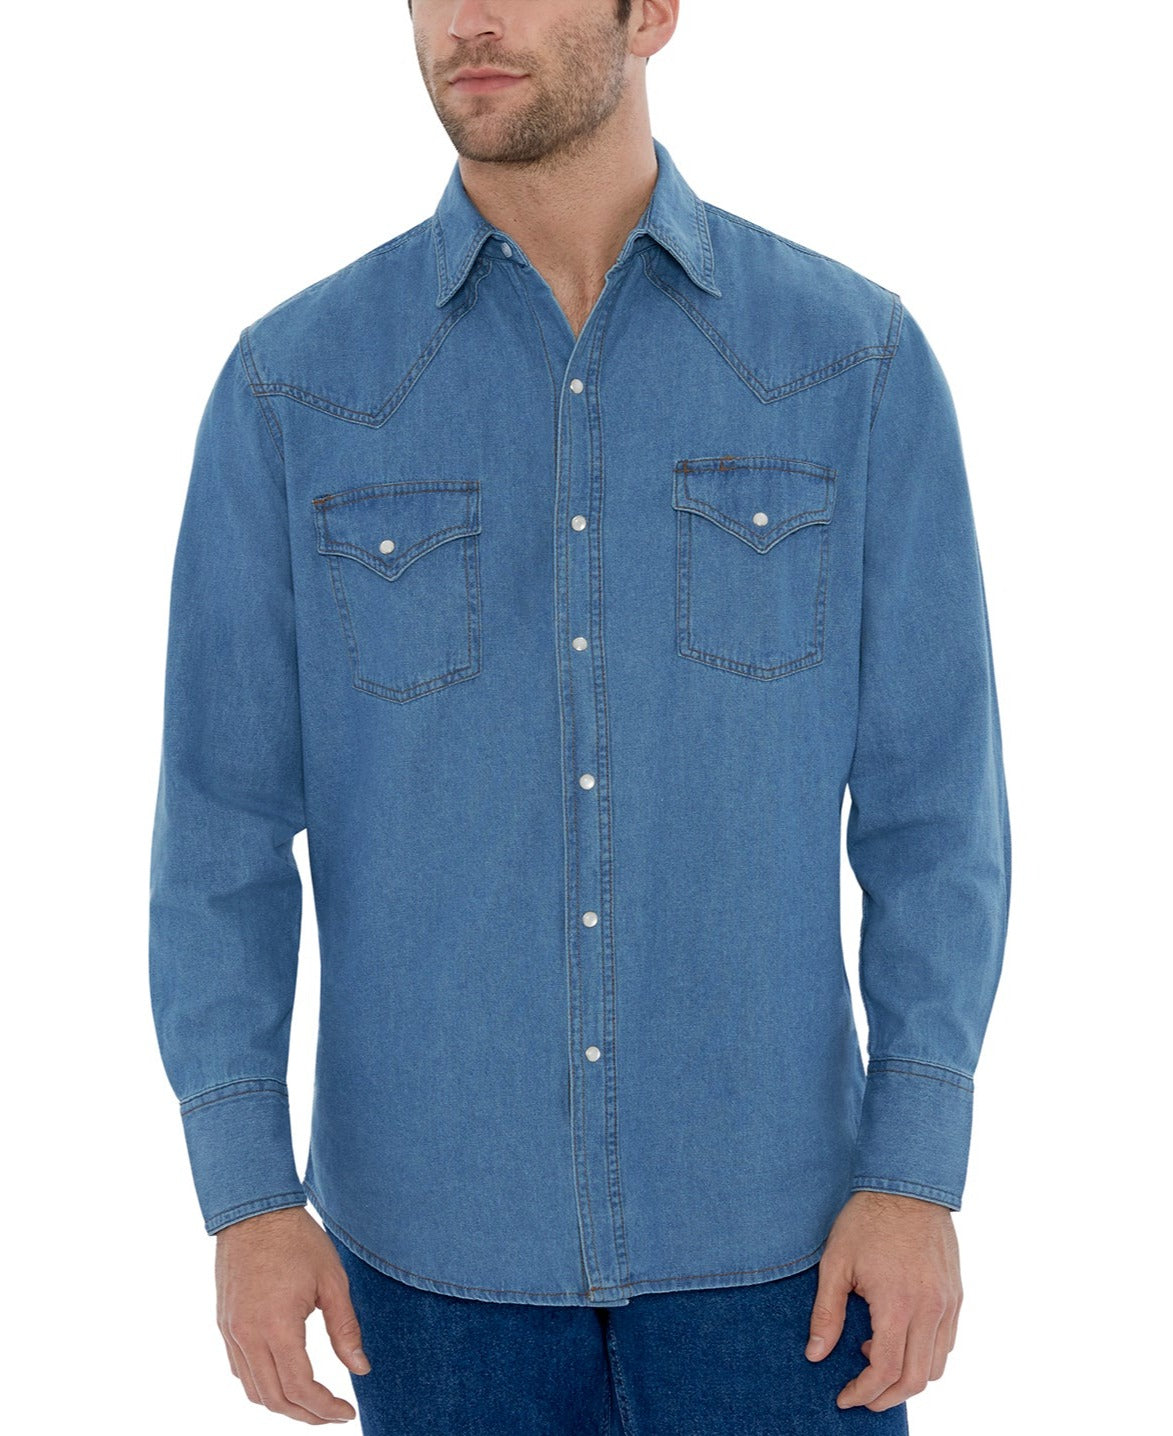 Buy WES Casuals Light Blue Cotton Slim-Fit Shirt from Westside